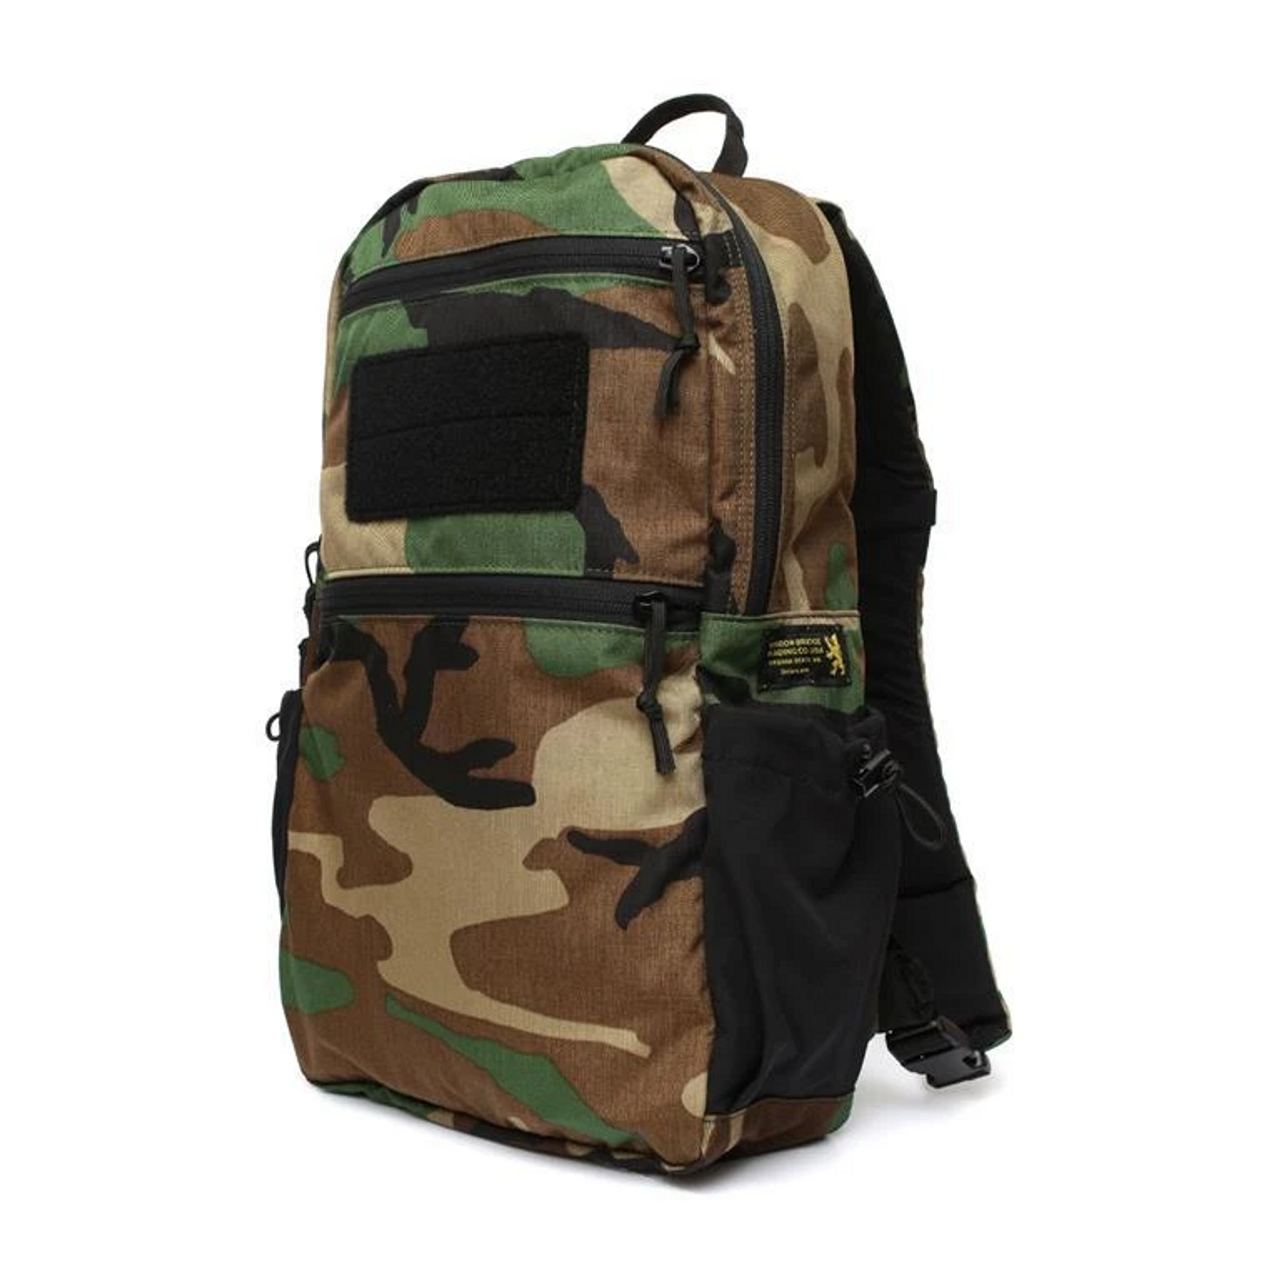 LBT 8005A 14L Day Pack